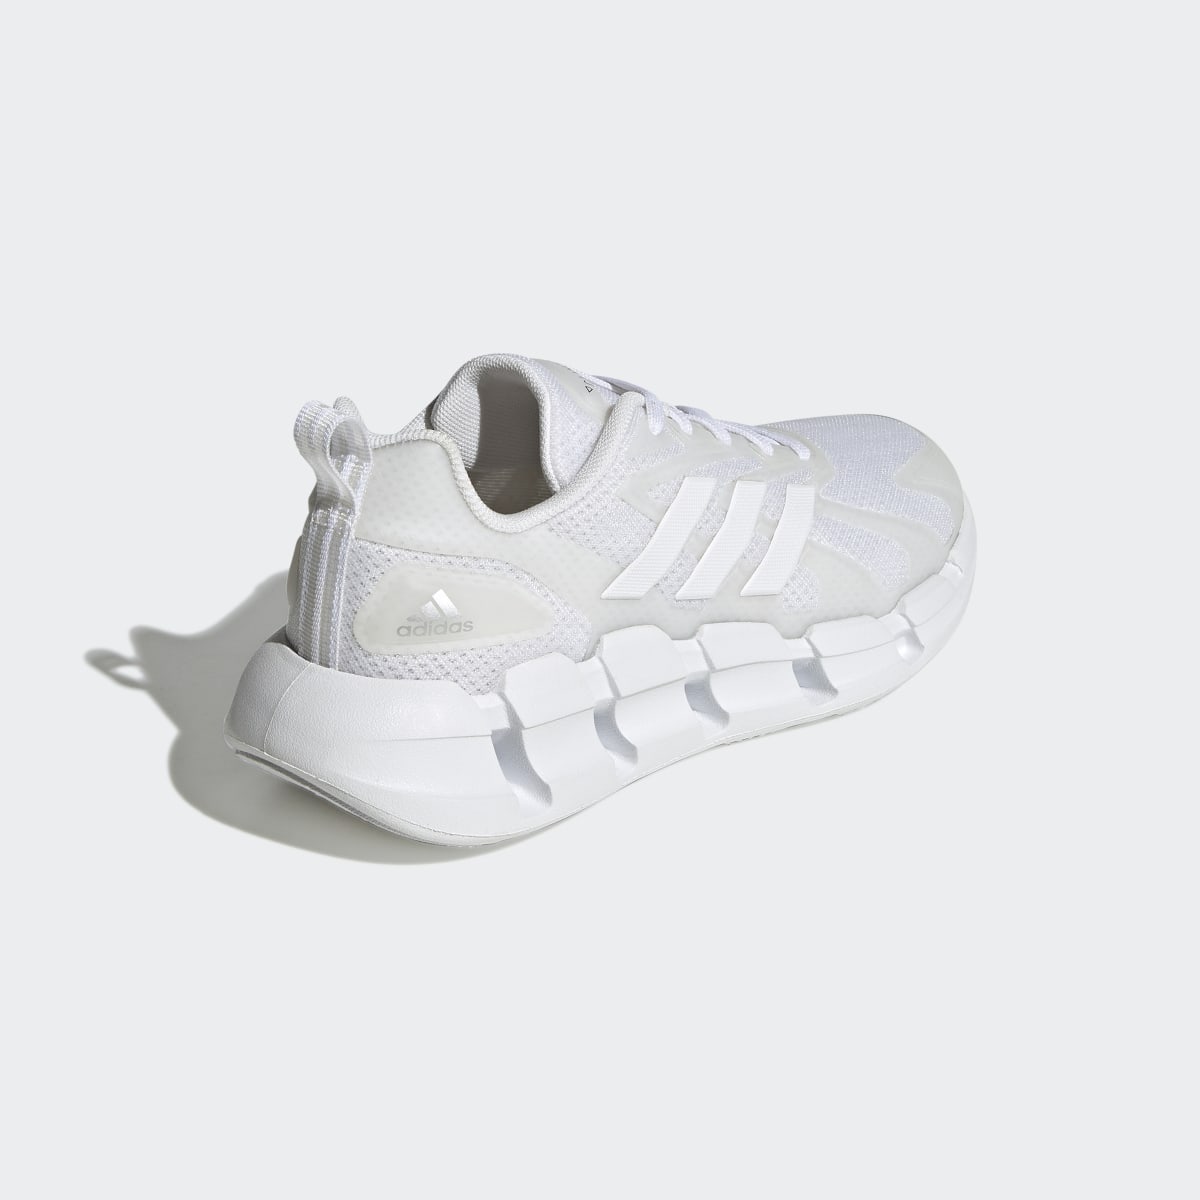 Adidas Ventice Climacool Shoes. 6